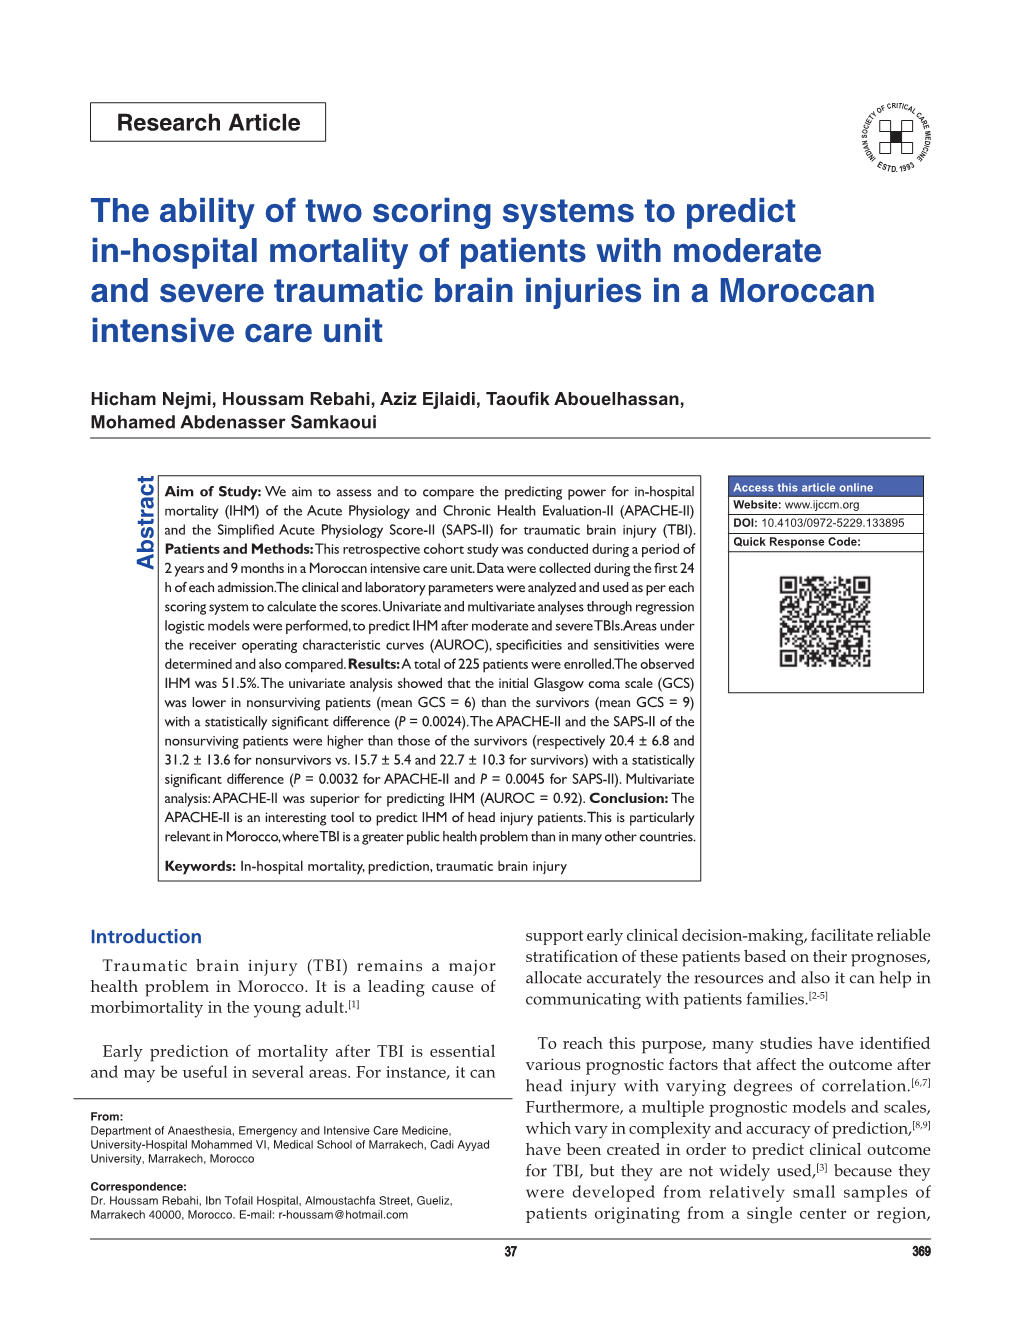 The Ability of Two Scoring Systems to Predict In-Hospital Mortality of Patients with Moderate and Severe Traumatic Brain Injuries in a Moroccan Intensive Care Unit